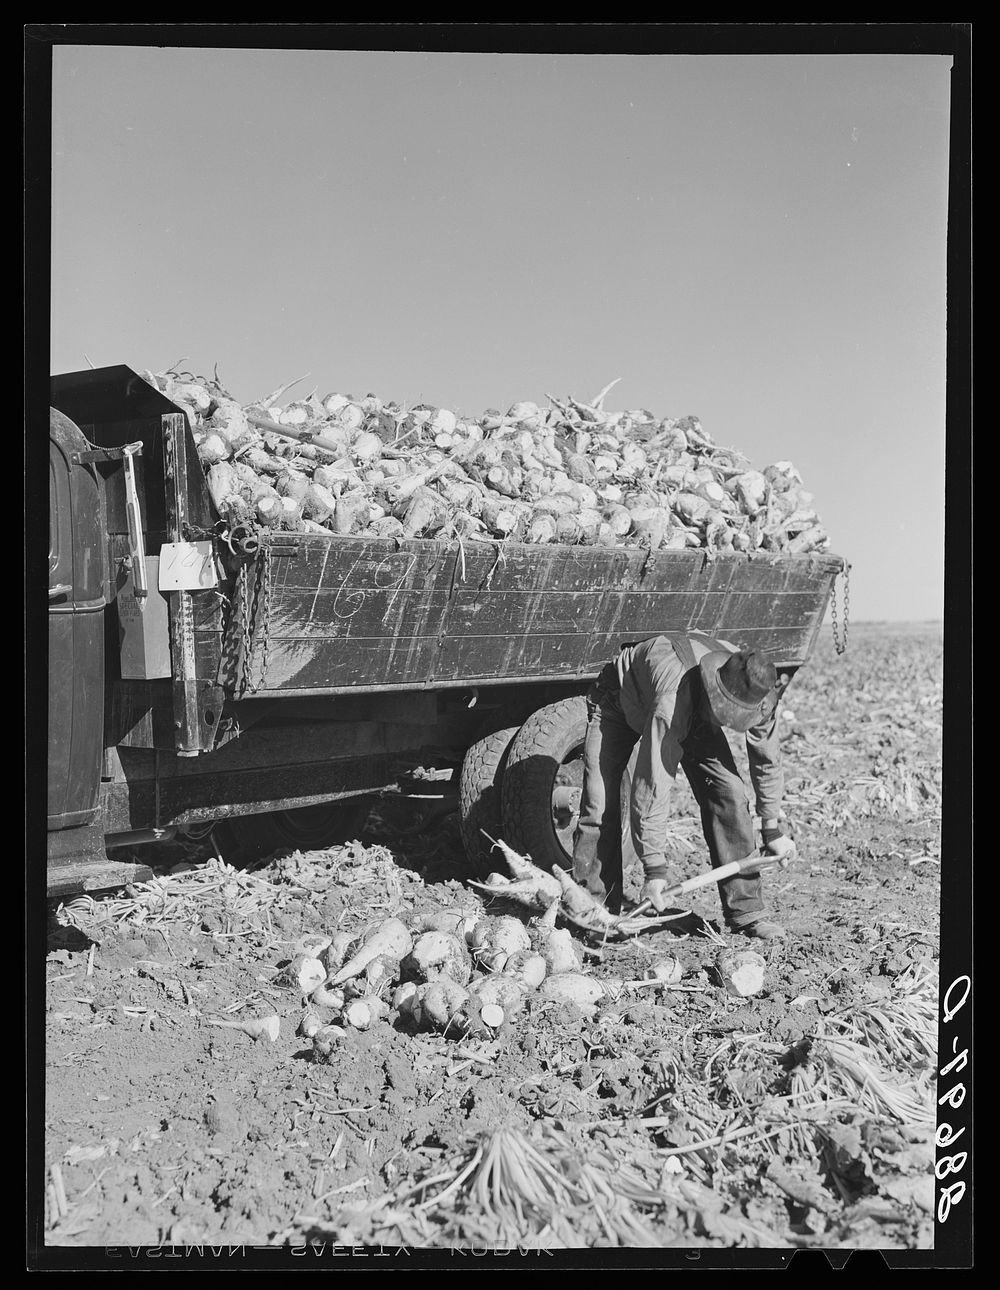 Loading topped sugar beets into truck. Adams County, Colorado. Sourced from the Library of Congress.